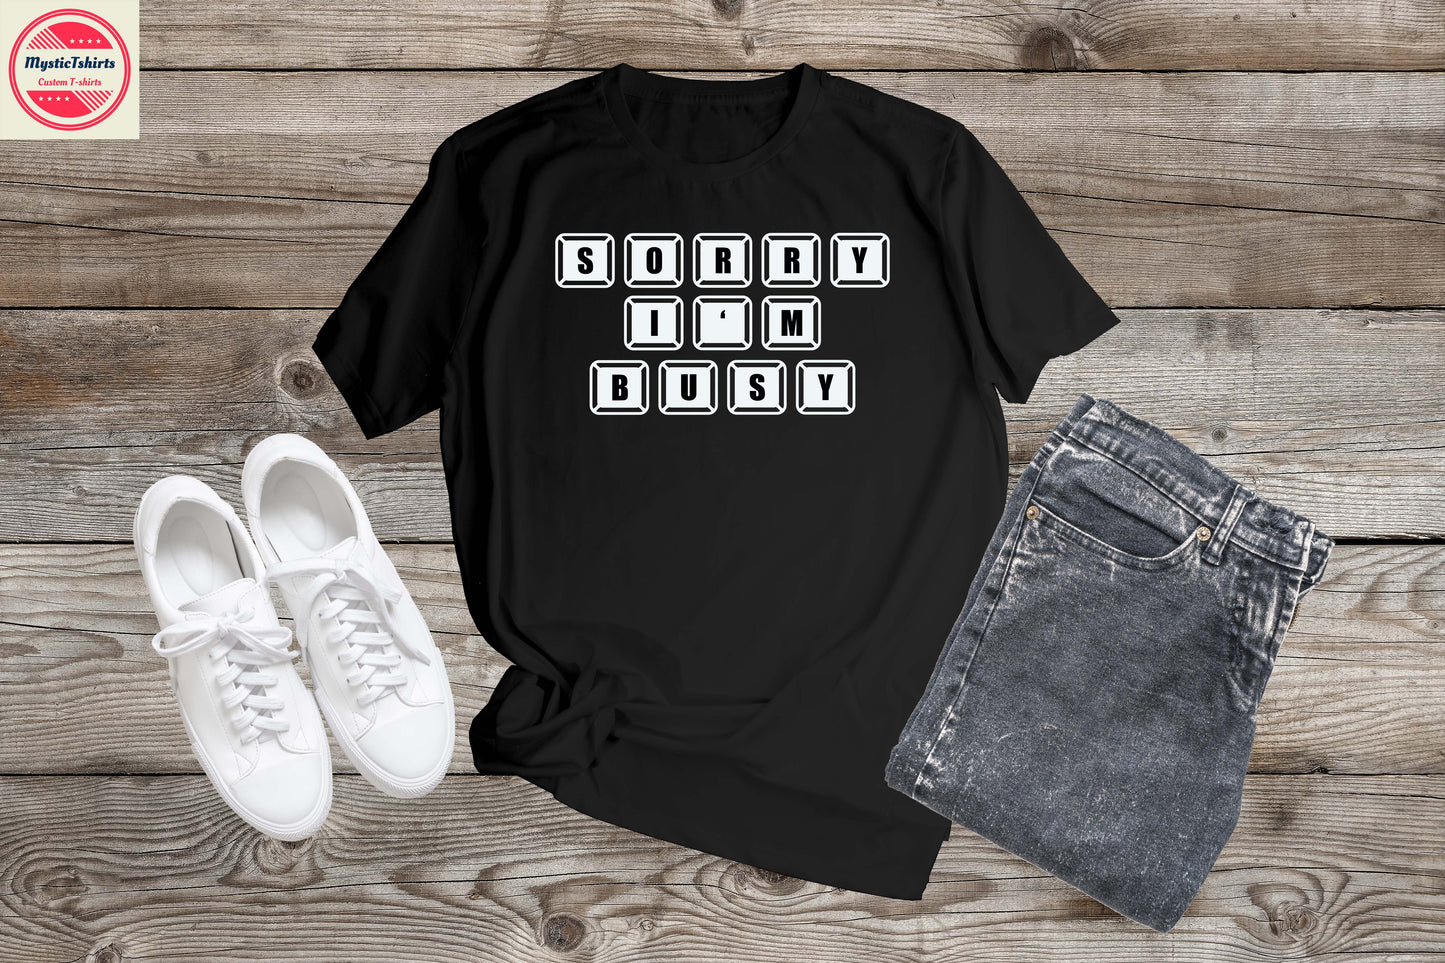 440. SORRY I'M BUSY, Custom Made Shirt, Personalized T-Shirt, Custom Text, Make Your Own Shirt, Custom Tee